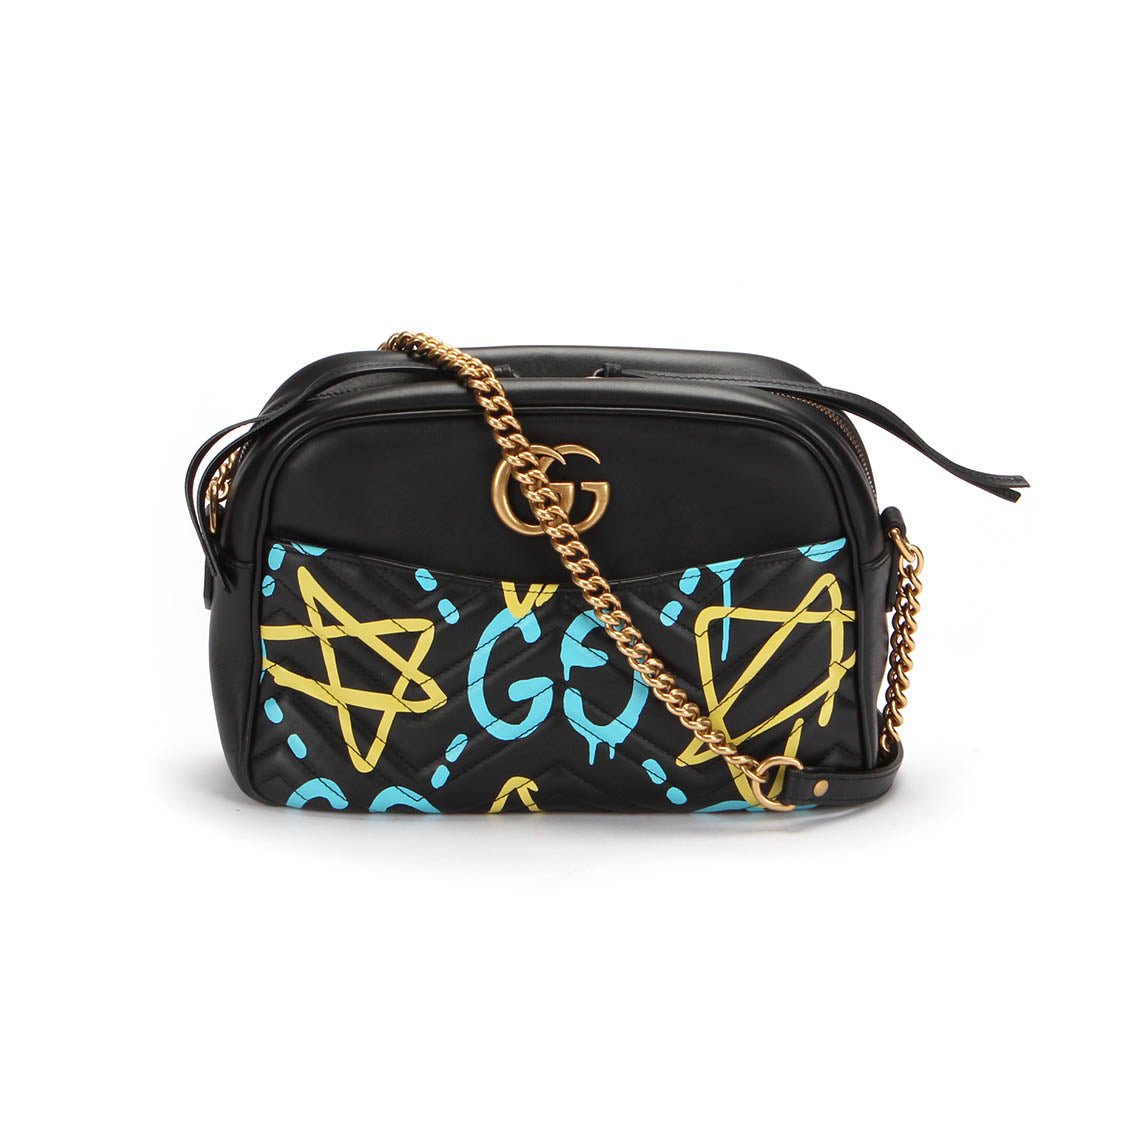 GG Marmont Ghost Leather Crossbody Bag 443499